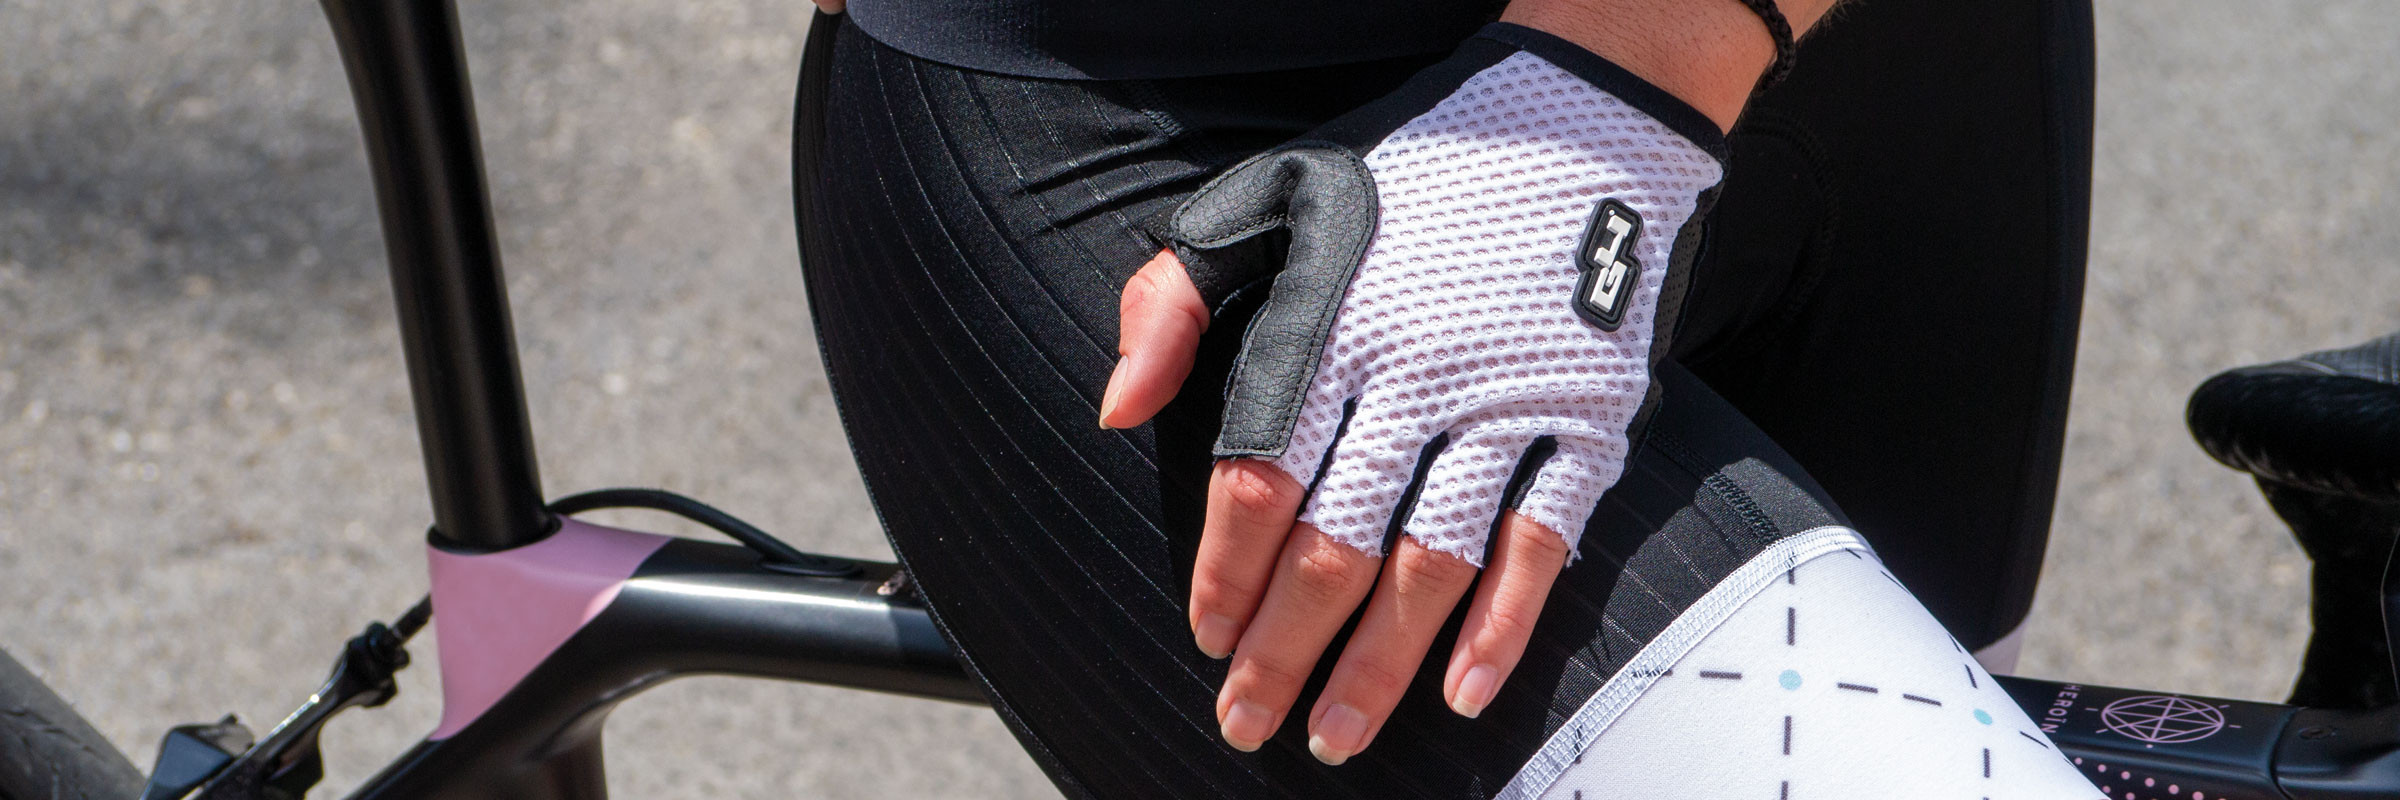 Women's cycling gloves - G4 dimension